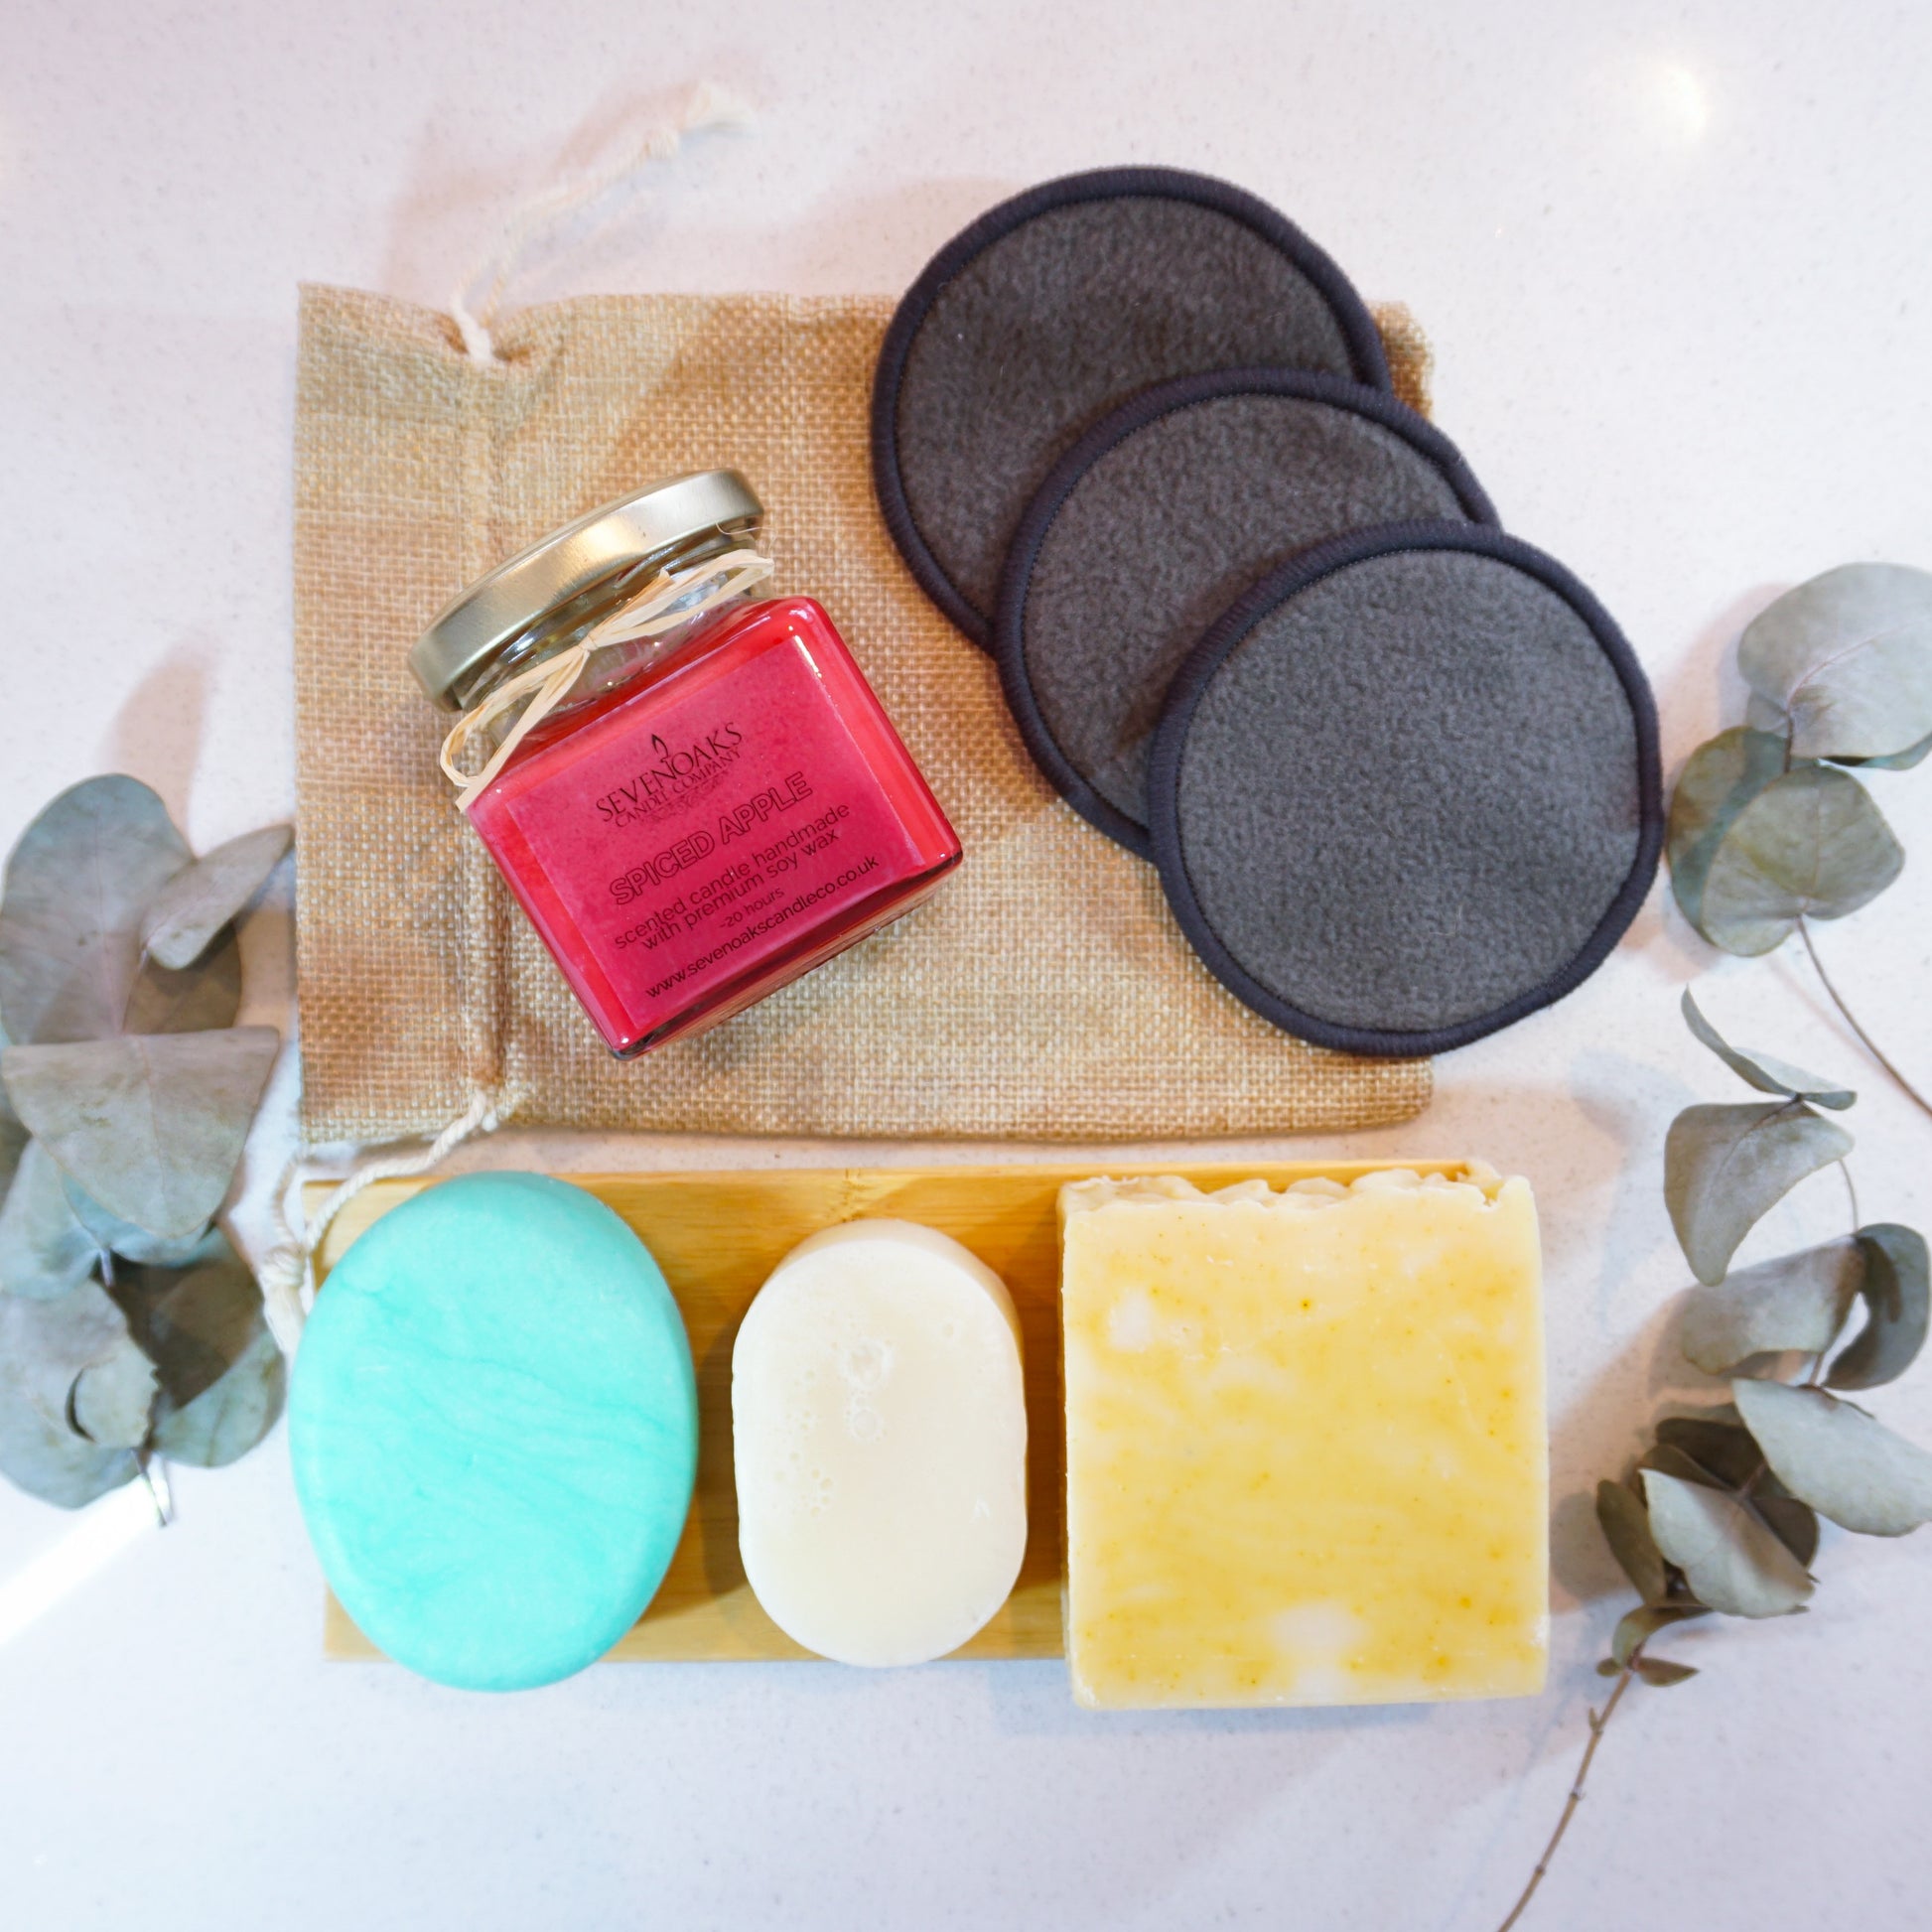 Washla Gift Set - Includes Candle, Soap, Shampoo and conditioner bar. Comes with a gift bag